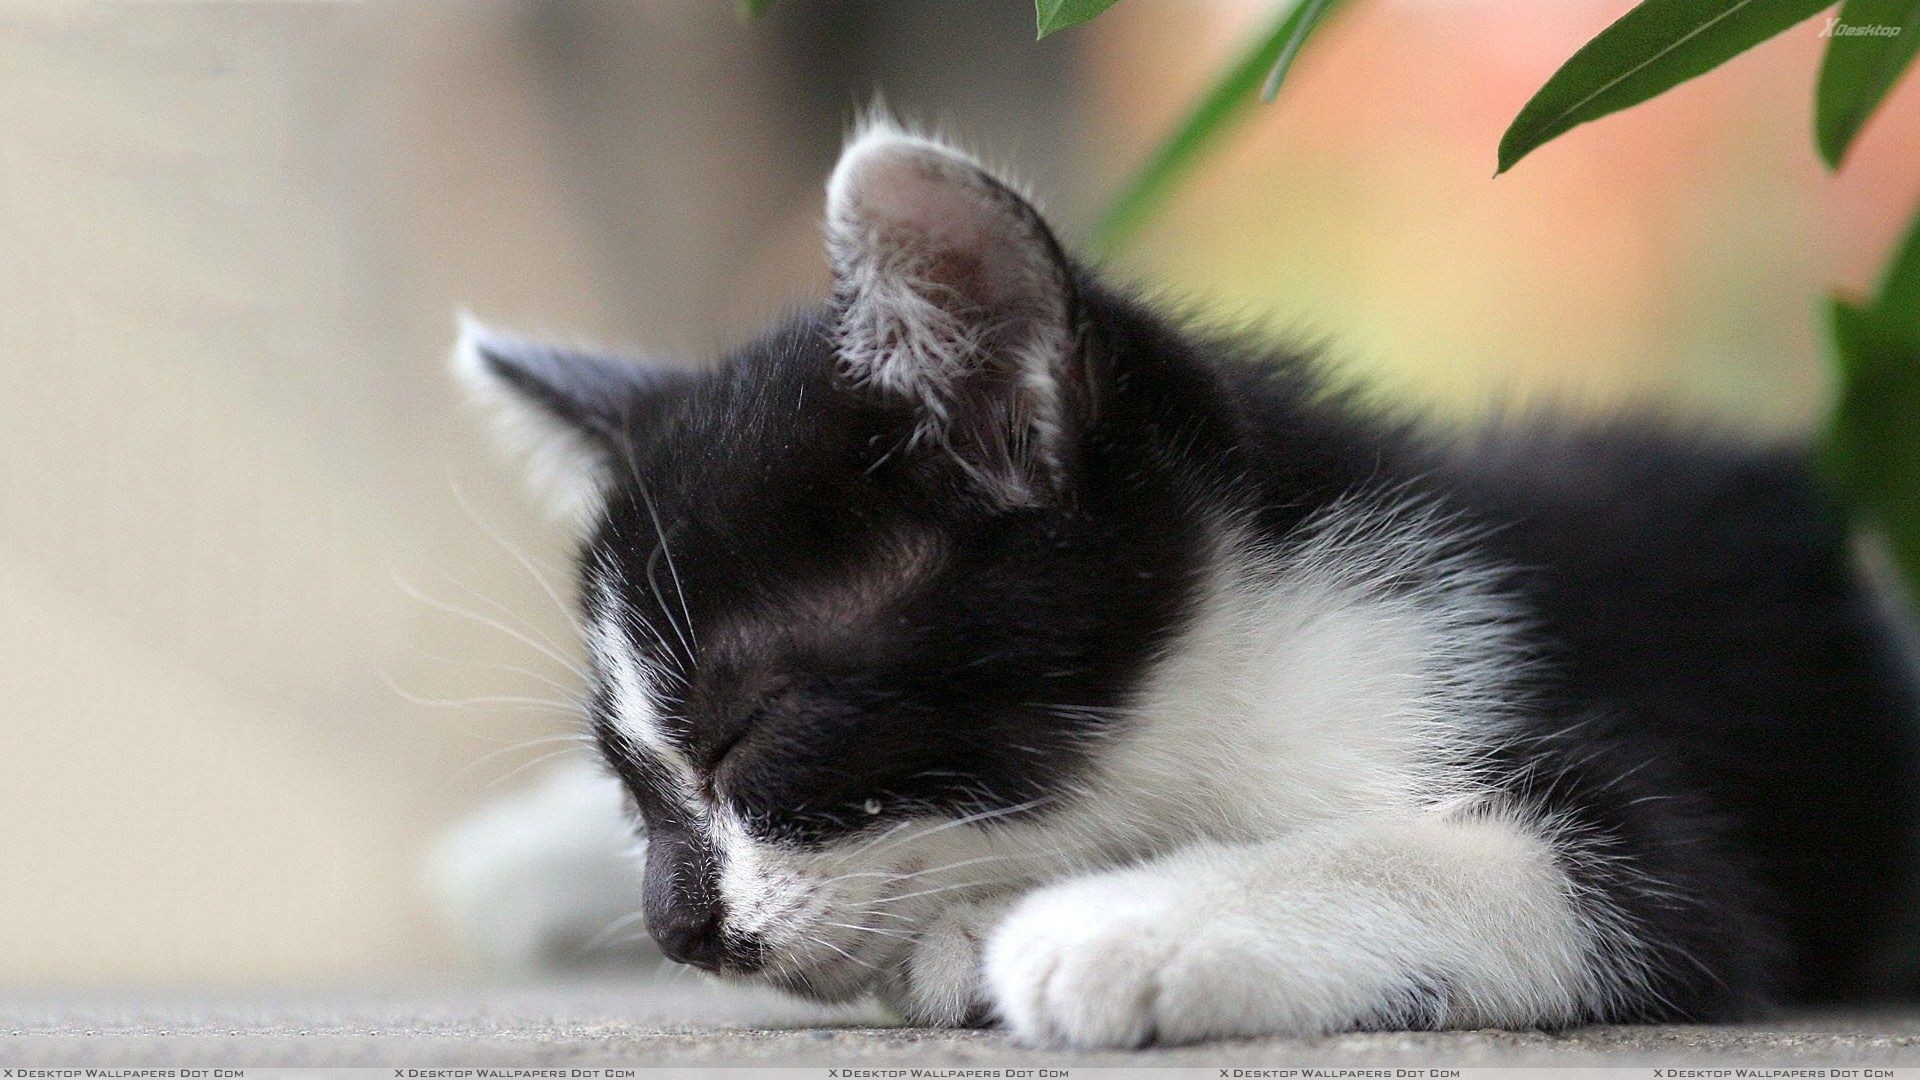 1920x1080 You are viewing wallpaper titled "Black N White Cat ...